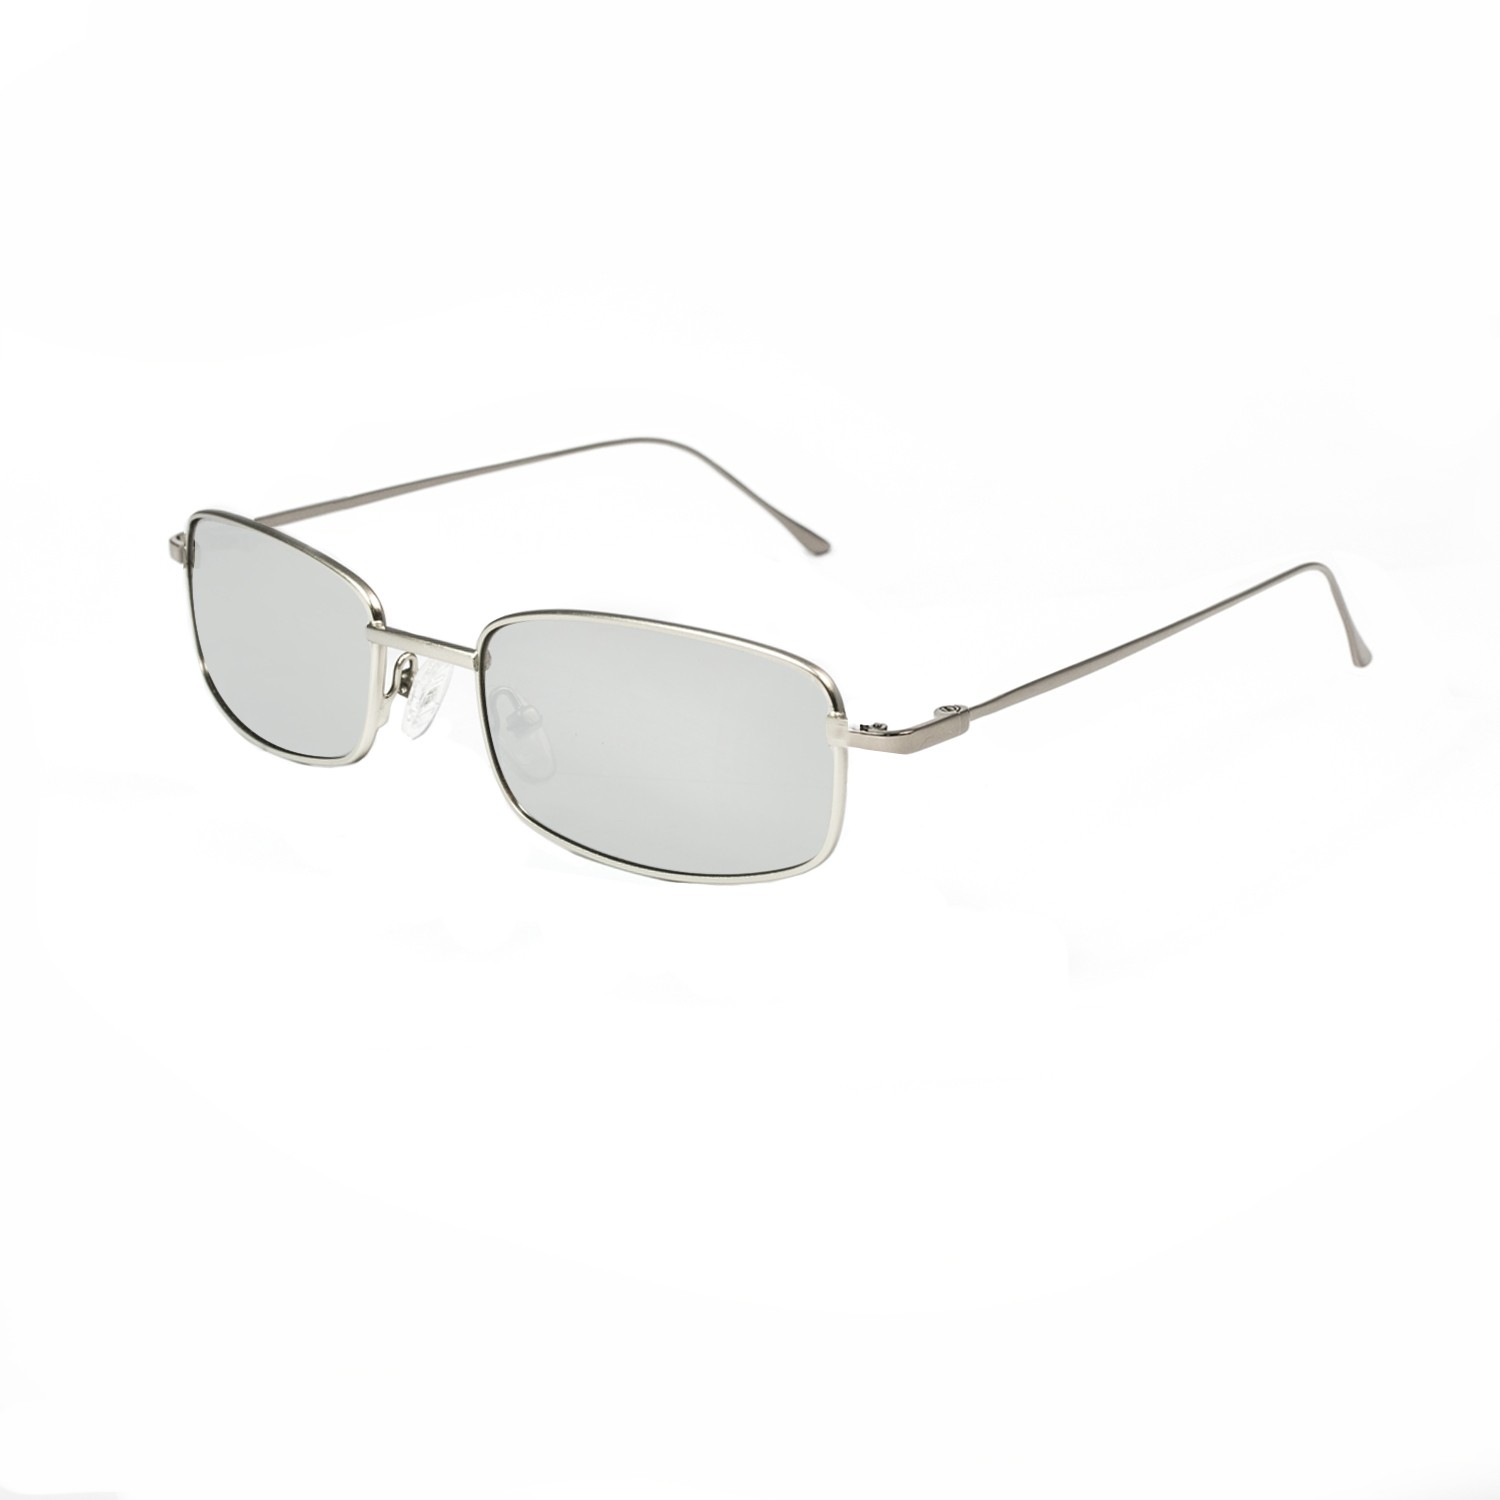 DYLAN silver metal frame with silver revo lens